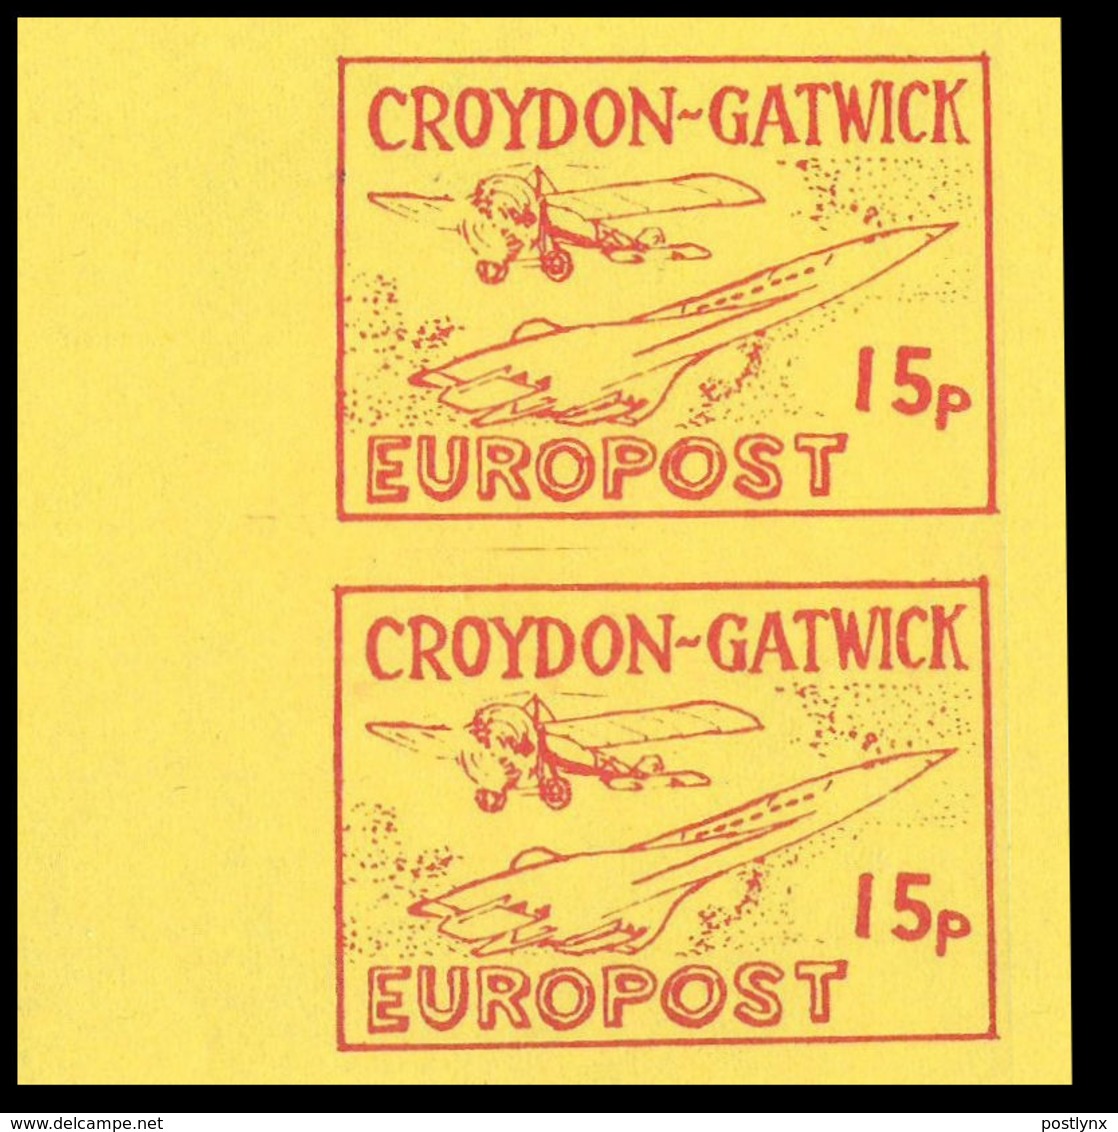 GREAT BRITAIN-Croydon Gatwick 1971 Aeroplane Concorde 15p #1 Large MARG.PAIR PROOF Yellow Paper - Essays, Proofs & Reprints